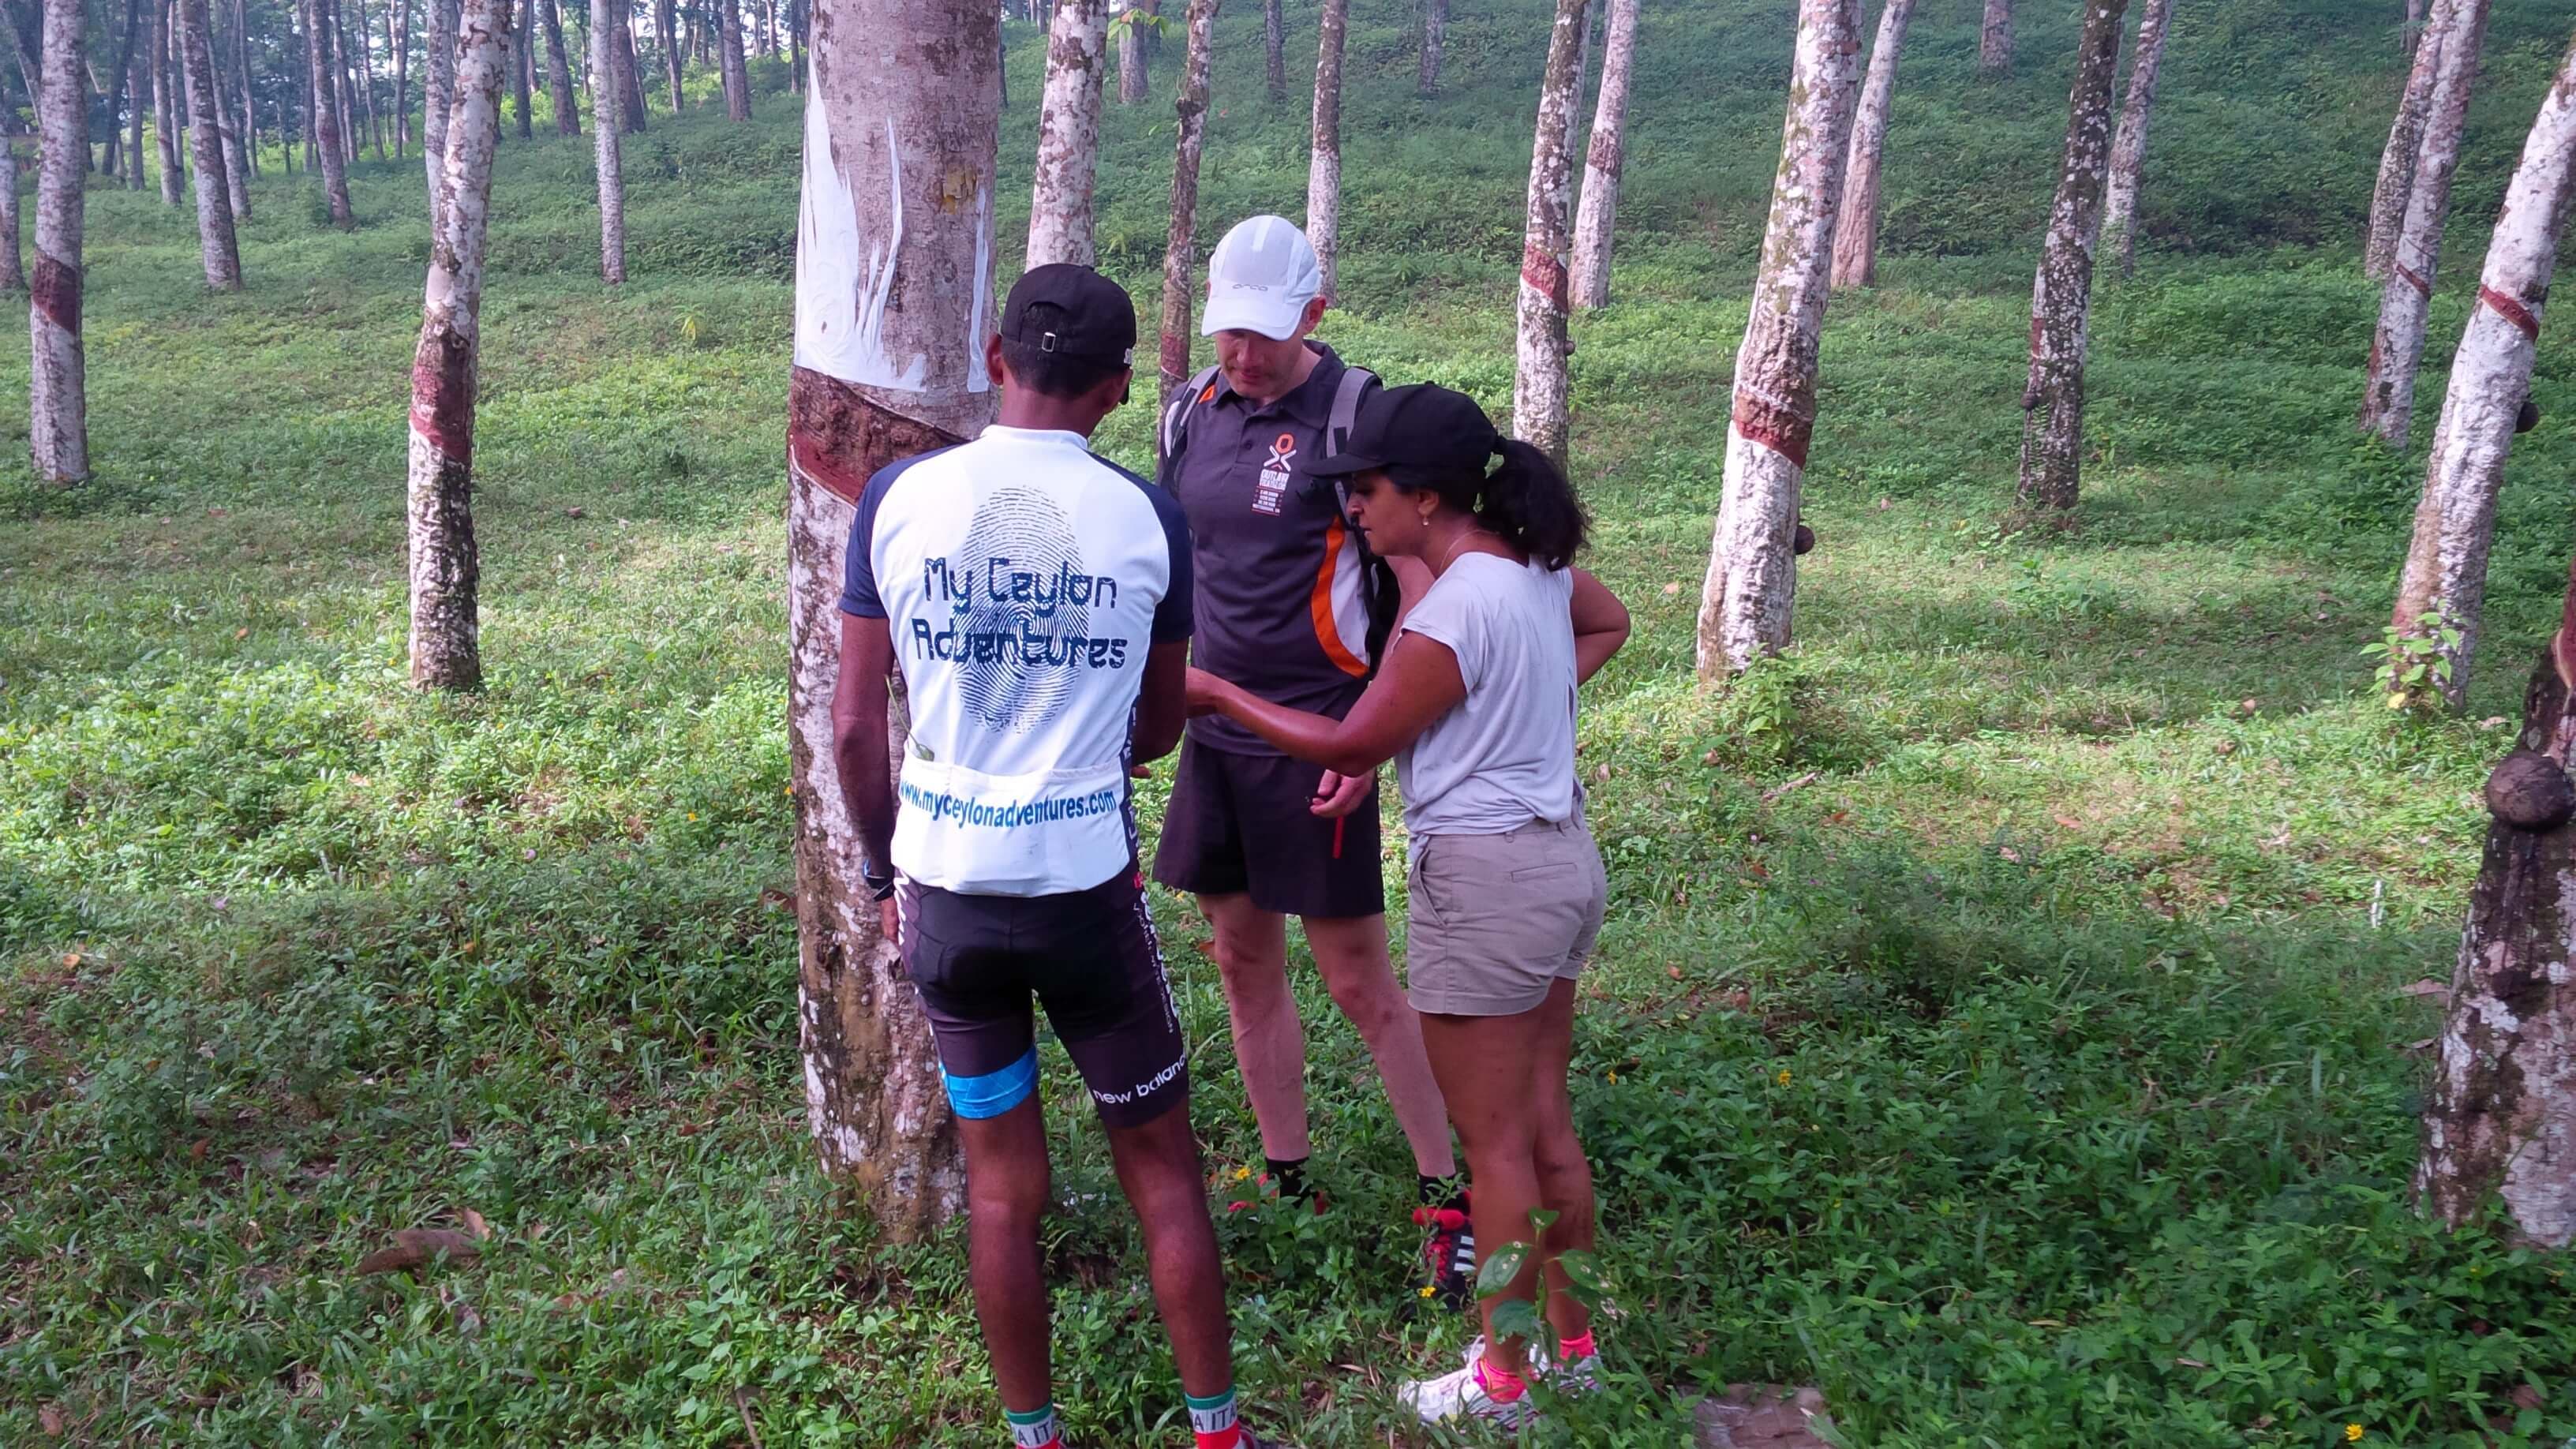 A guide explains about the natural rubber industry during cycling in Kithulgala countryside in Sri Lanka